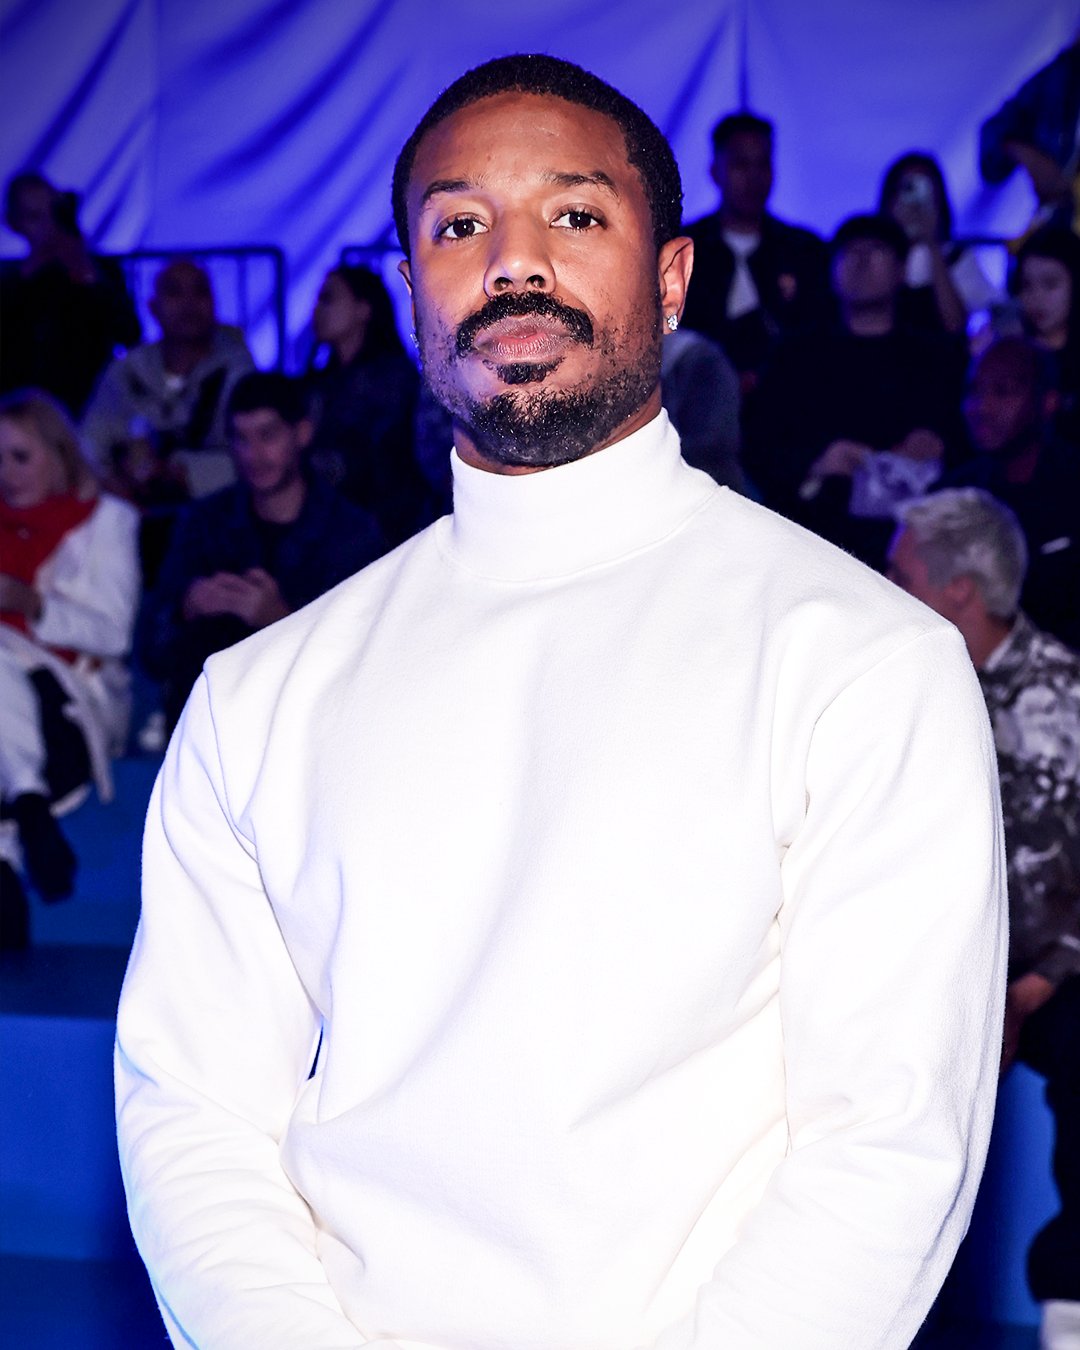 A man with a goatee and a turtle neck sweater photo – Man face